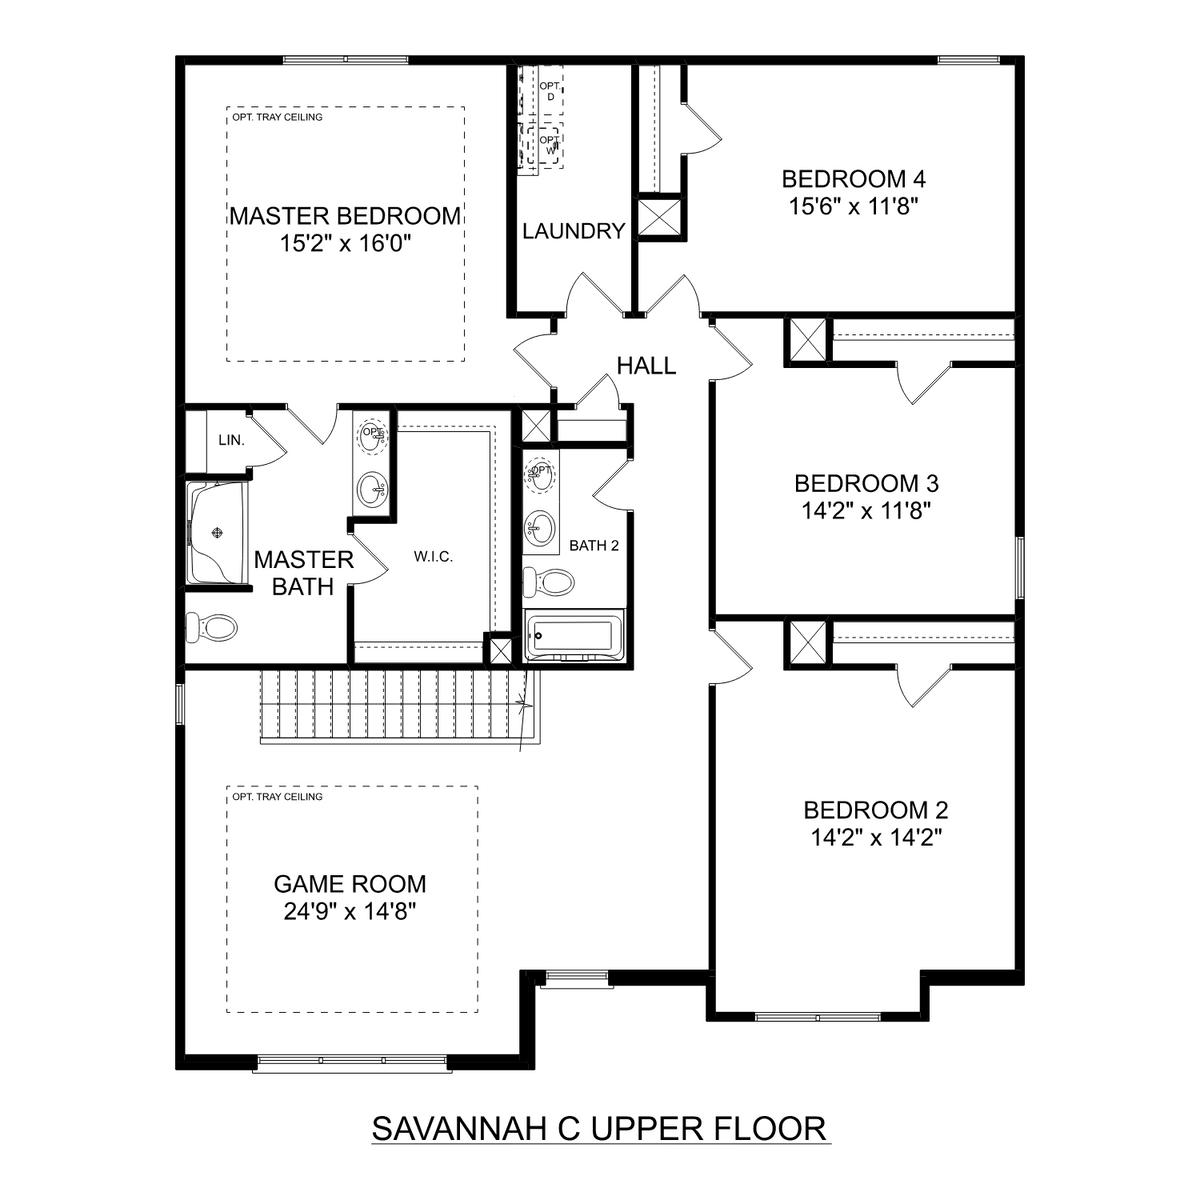 2 - The Savannah C floor plan layout for 12633 Tallulah Drive in Davidson Homes' Newby Chapel community.